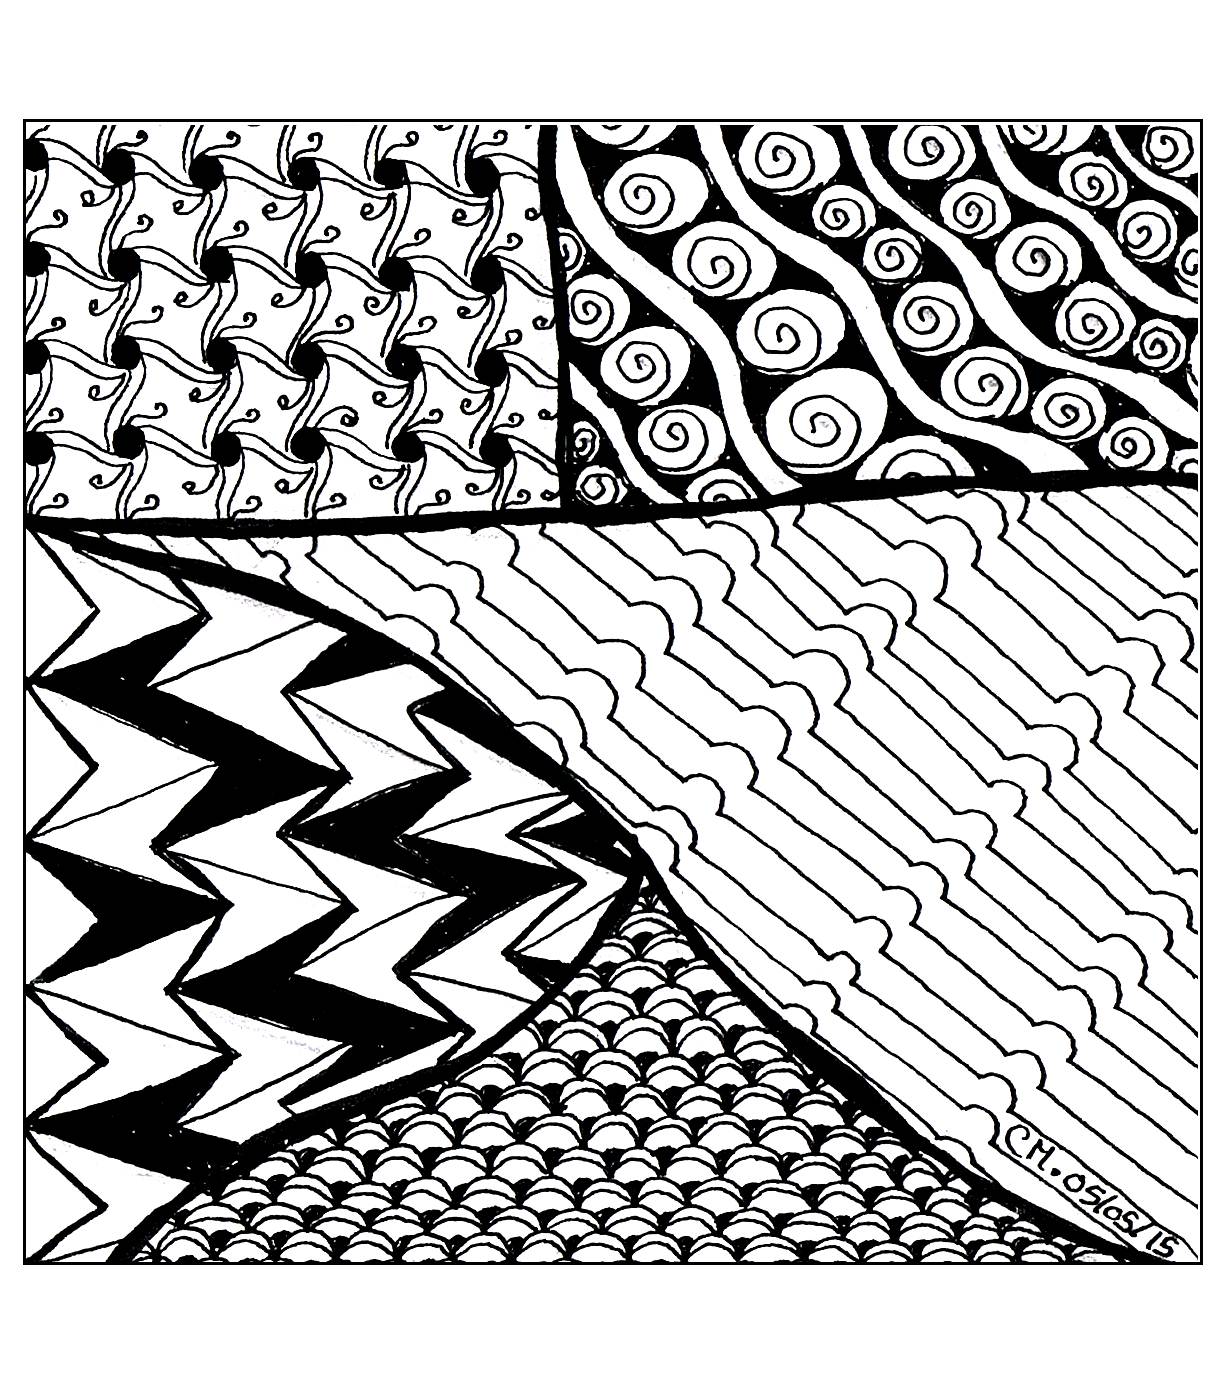 'Illusion', exclusive coloring page See the original work